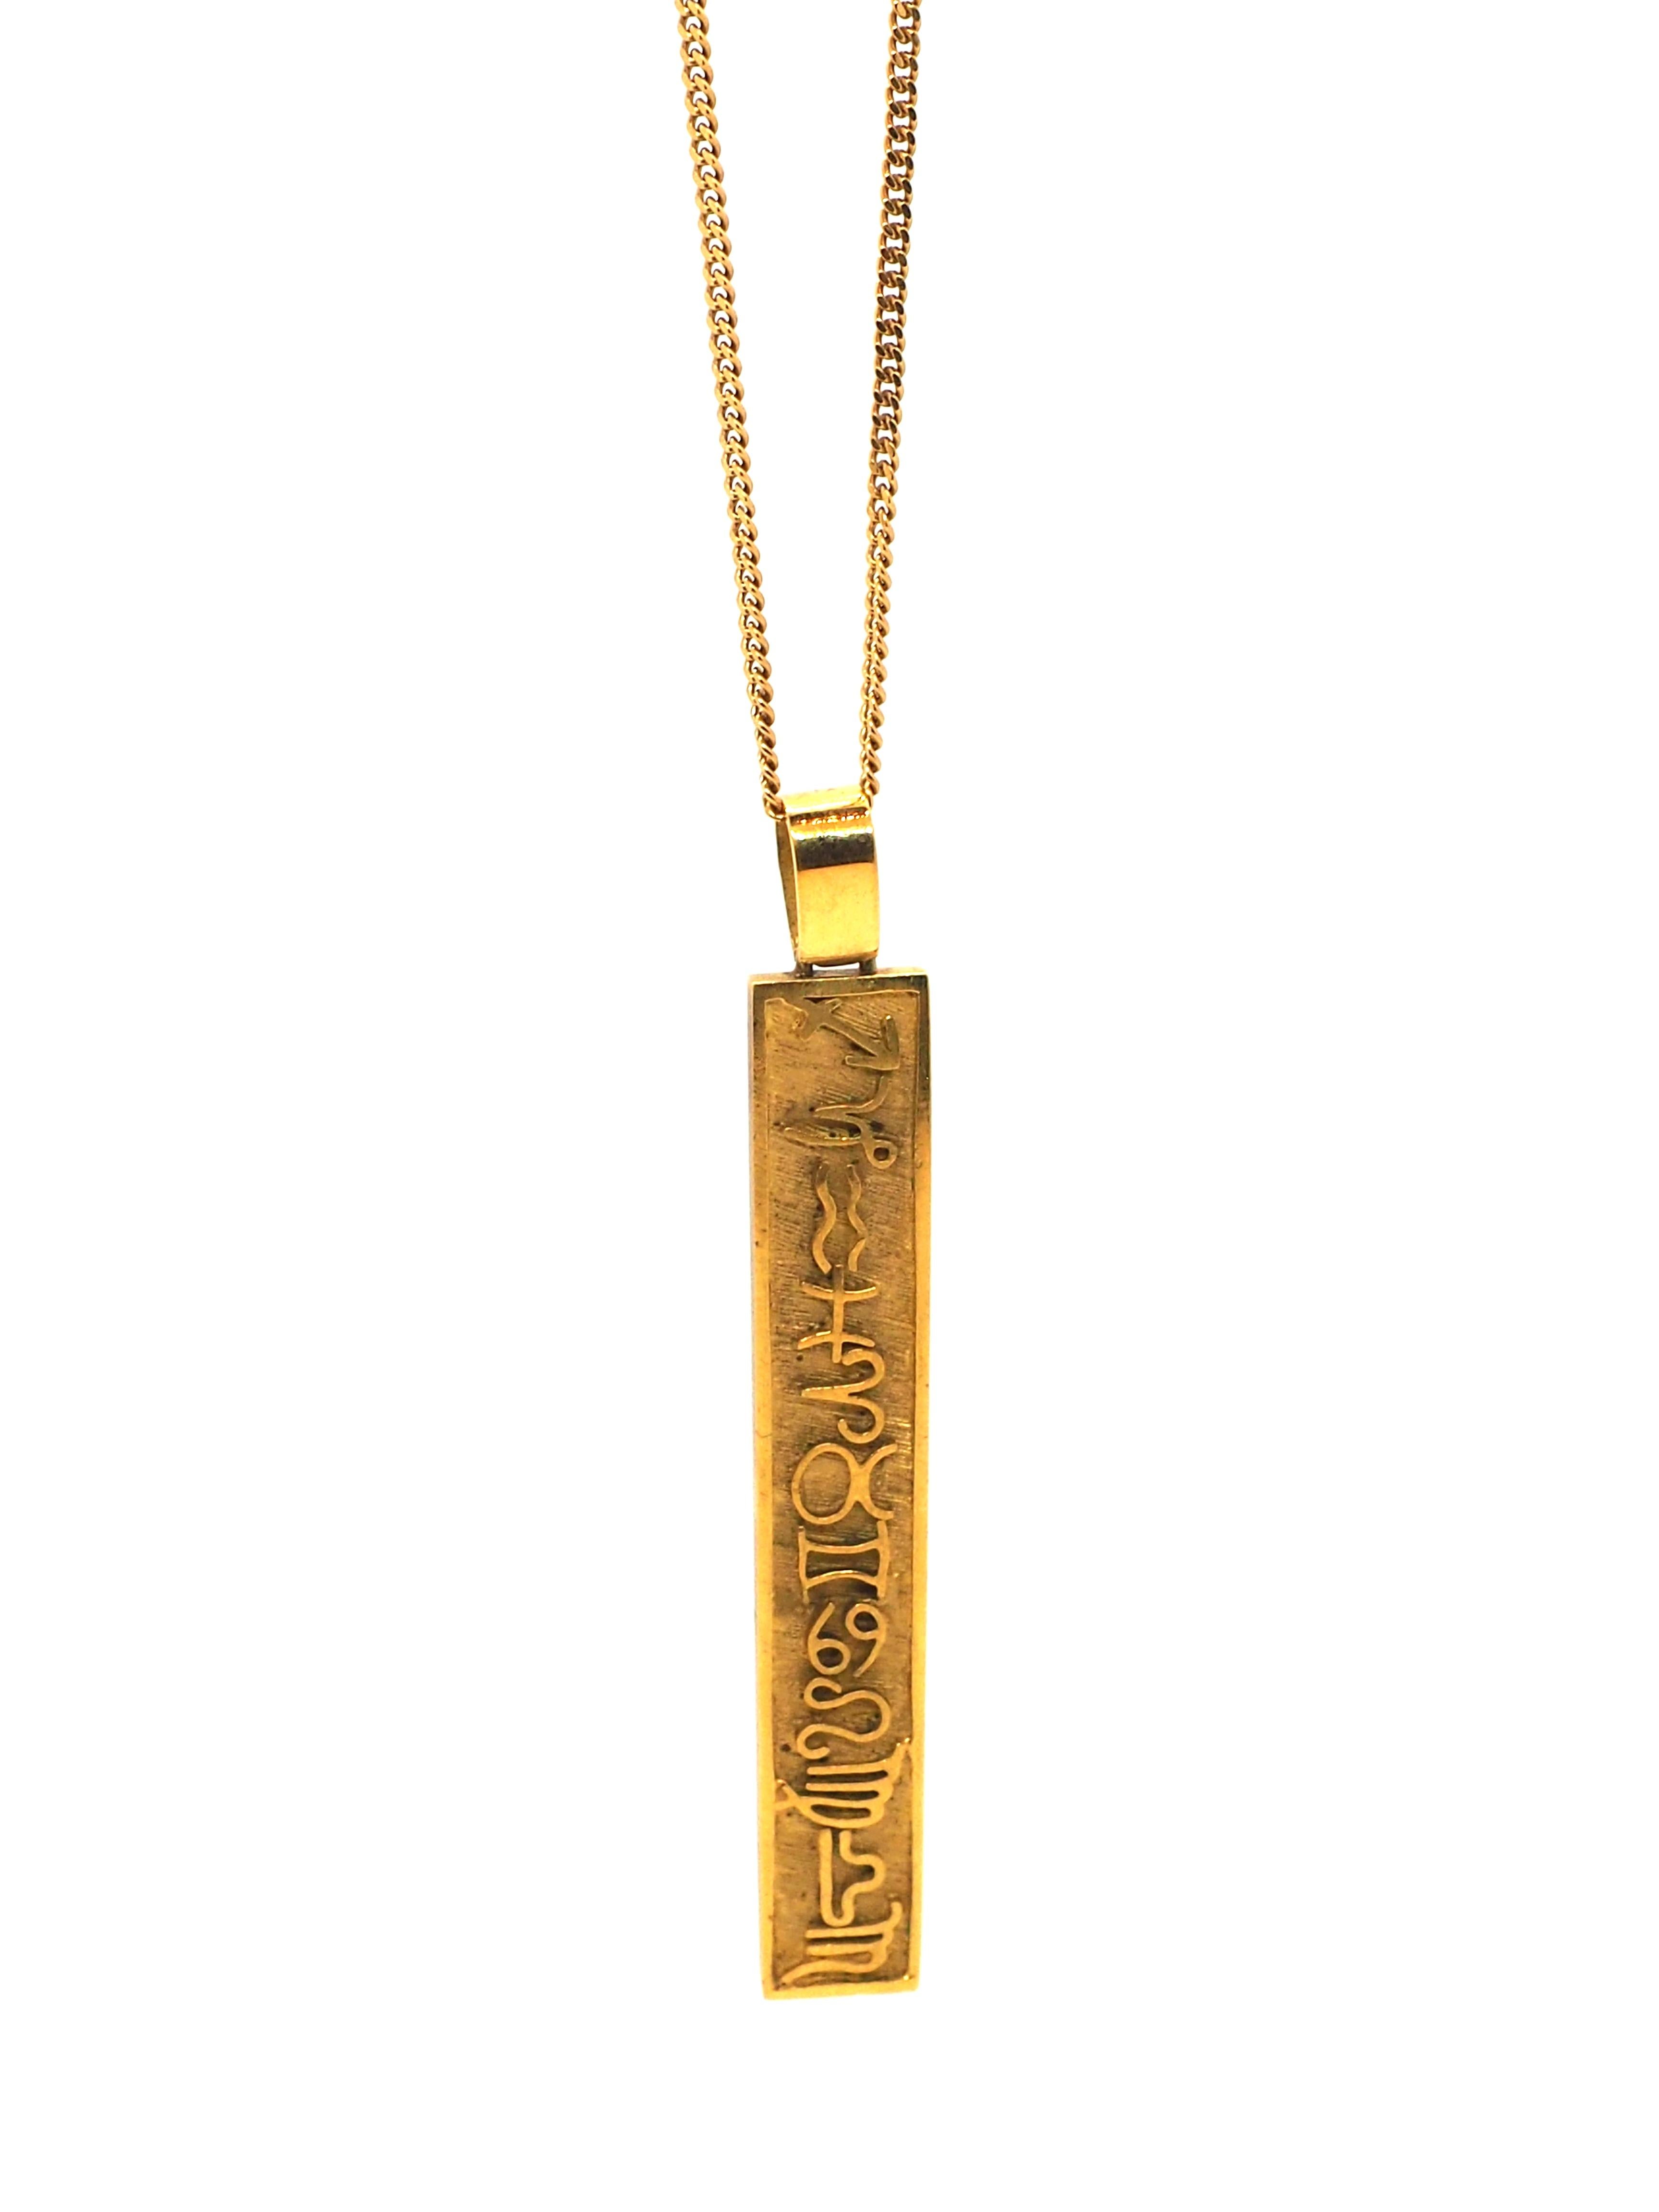 Step into the enchanting world of vintage craftsmanship with this Gilbert Albert 18K yellow gold pendant, adorned with the twelve astrological signs. This exquisite piece is a true testament to Gilbert Albert's artistry and mastery, capturing the